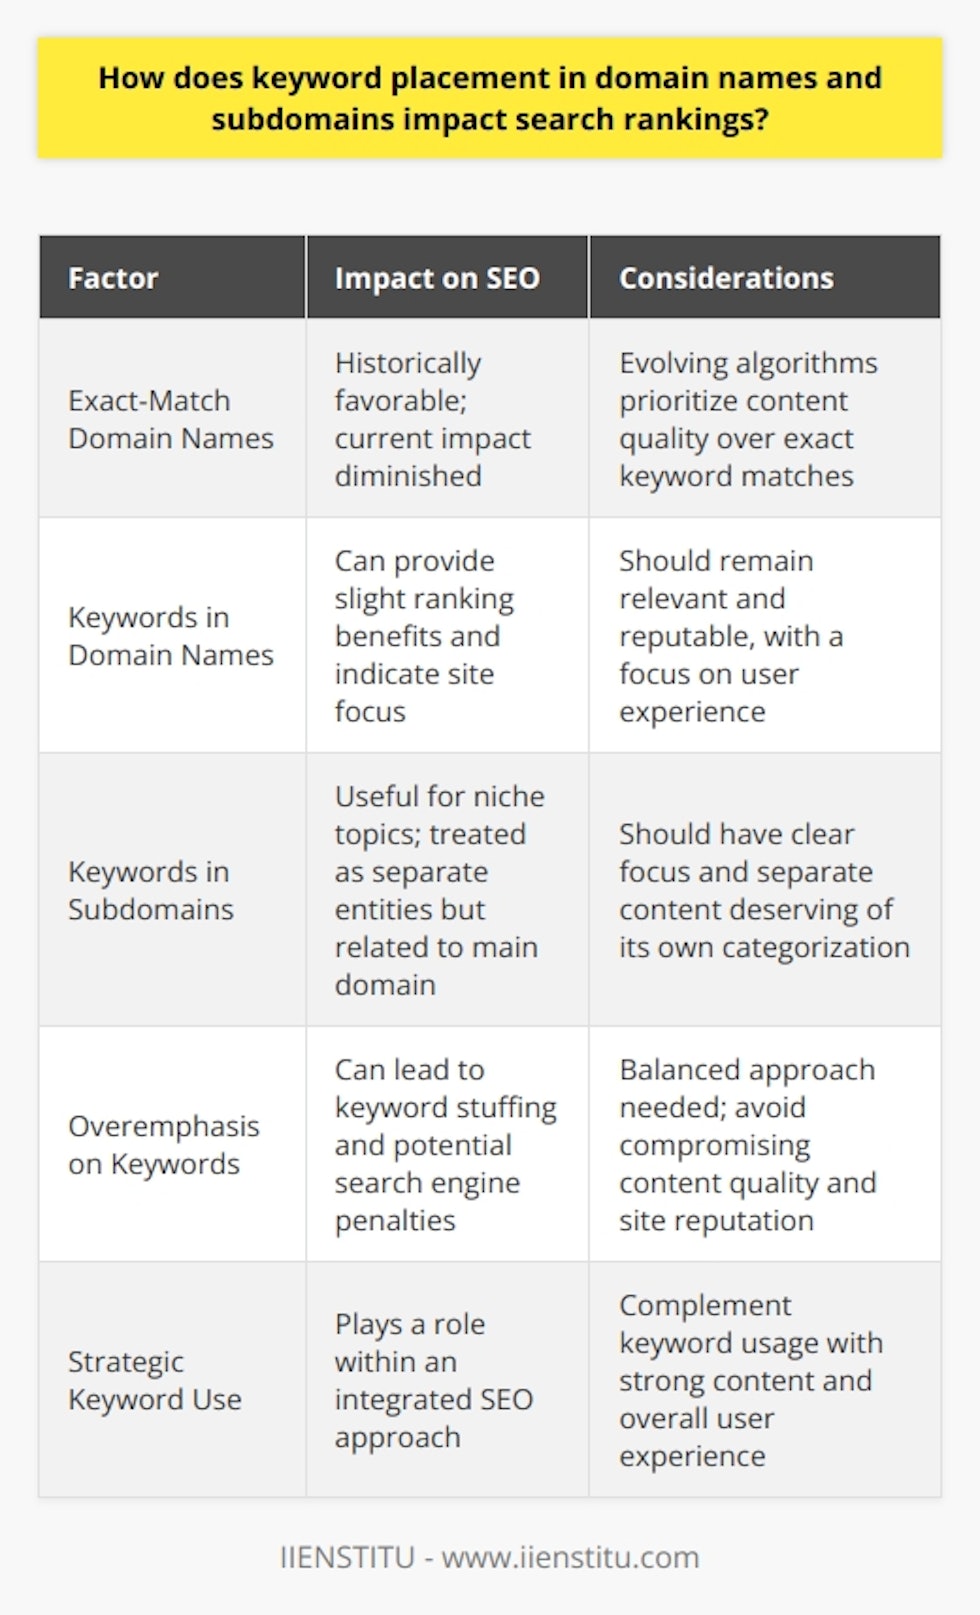 Understanding the nuances of search engine optimization (SEO) is critical for digital marketing success, and one of its most debated aspects is the placement of keywords within domain names and subdomains. Exploring this topic can yield insights into the strategies that may give websites an edge in the fiercely competitive landscape of online search rankings.**Keyword-Enriched Domain Names**Historically, exact-match domains (EMDs), which include specific keywords that users might enter into search engines, were heavily favored by search algorithms. For example, a domain such as 'bestlaptopreviews.com' would have been advantageous for a site focusing on laptop reviews. Despite this, the influence of keywords in domain names has diminished over time as search engines evolve to prioritize content quality, user experience, and other relevance factors.Currently, having a keyword in your domain name may still provide slight ranking benefits, especially if the domain remains relevant, reputable, and delivers a high-quality user experience. Keyword-rich domains can also offer a clear indication of what a site is about, which might increase click-through rates from the search results.**Subdomains and Keywords**Subdomains allow organizations to separate distinct parts of their websites, facilitating better organization of varied content and potentially aiding in user navigation. When a keyword is incorporated into a subdomain, like 'laptopreviews.example.com', it indicates a clear focus on a particular subject. Although subdomains are indexed and treated as individual entities by search engines, they inherit some brand recognition and trustworthiness from the main domain.Using a keyword-rich subdomain can be beneficial when trying to rank for specific niche topics or when intending to separate different business units or product lines. Nonetheless, the content and authority of the subdomain are pivotal in achieving sustainable search rankings.**Limitations of Keyword Focus in Domains**Focusing too much on keyword usage in domain names and subdomains can have drawbacks, as modern search engines are sophisticated enough to see past the basic naming strategies. Presenting well-structured, authoritative, and informative content is the cornerstone of good SEO. Aspects such as site architecture, page load speed, mobile optimization, on-page content quality, and a strong backlink profile are critical components that influence rankings more significantly than domain names.Additionally, overemphasis on keywords in domain names can sometimes lead to issues like keyword stuffing, which might attract penalties from search engines, thereby harming a site's reputation and credibility.**Strategic Use of Keywords in Domains and Subdomains**Despite their decreasing influence, strategic use of keywords in domain names and subdomains should not be completely overlooked. If organically incorporated, they can still play a useful, albeit small, role in an integrated SEO approach that centers around content effectiveness and the overall user experience.In essence, while incorporating keywords into domain names and subdomains is worth consideration, it should be part of a broader SEO and content marketing strategy that aligns with the primary objectives of providing value to the user and meeting search engines' sophisticated criteria for quality. It's a balancing act where keyword usage complements, but does not override, the essence of authentic and user-focused content.